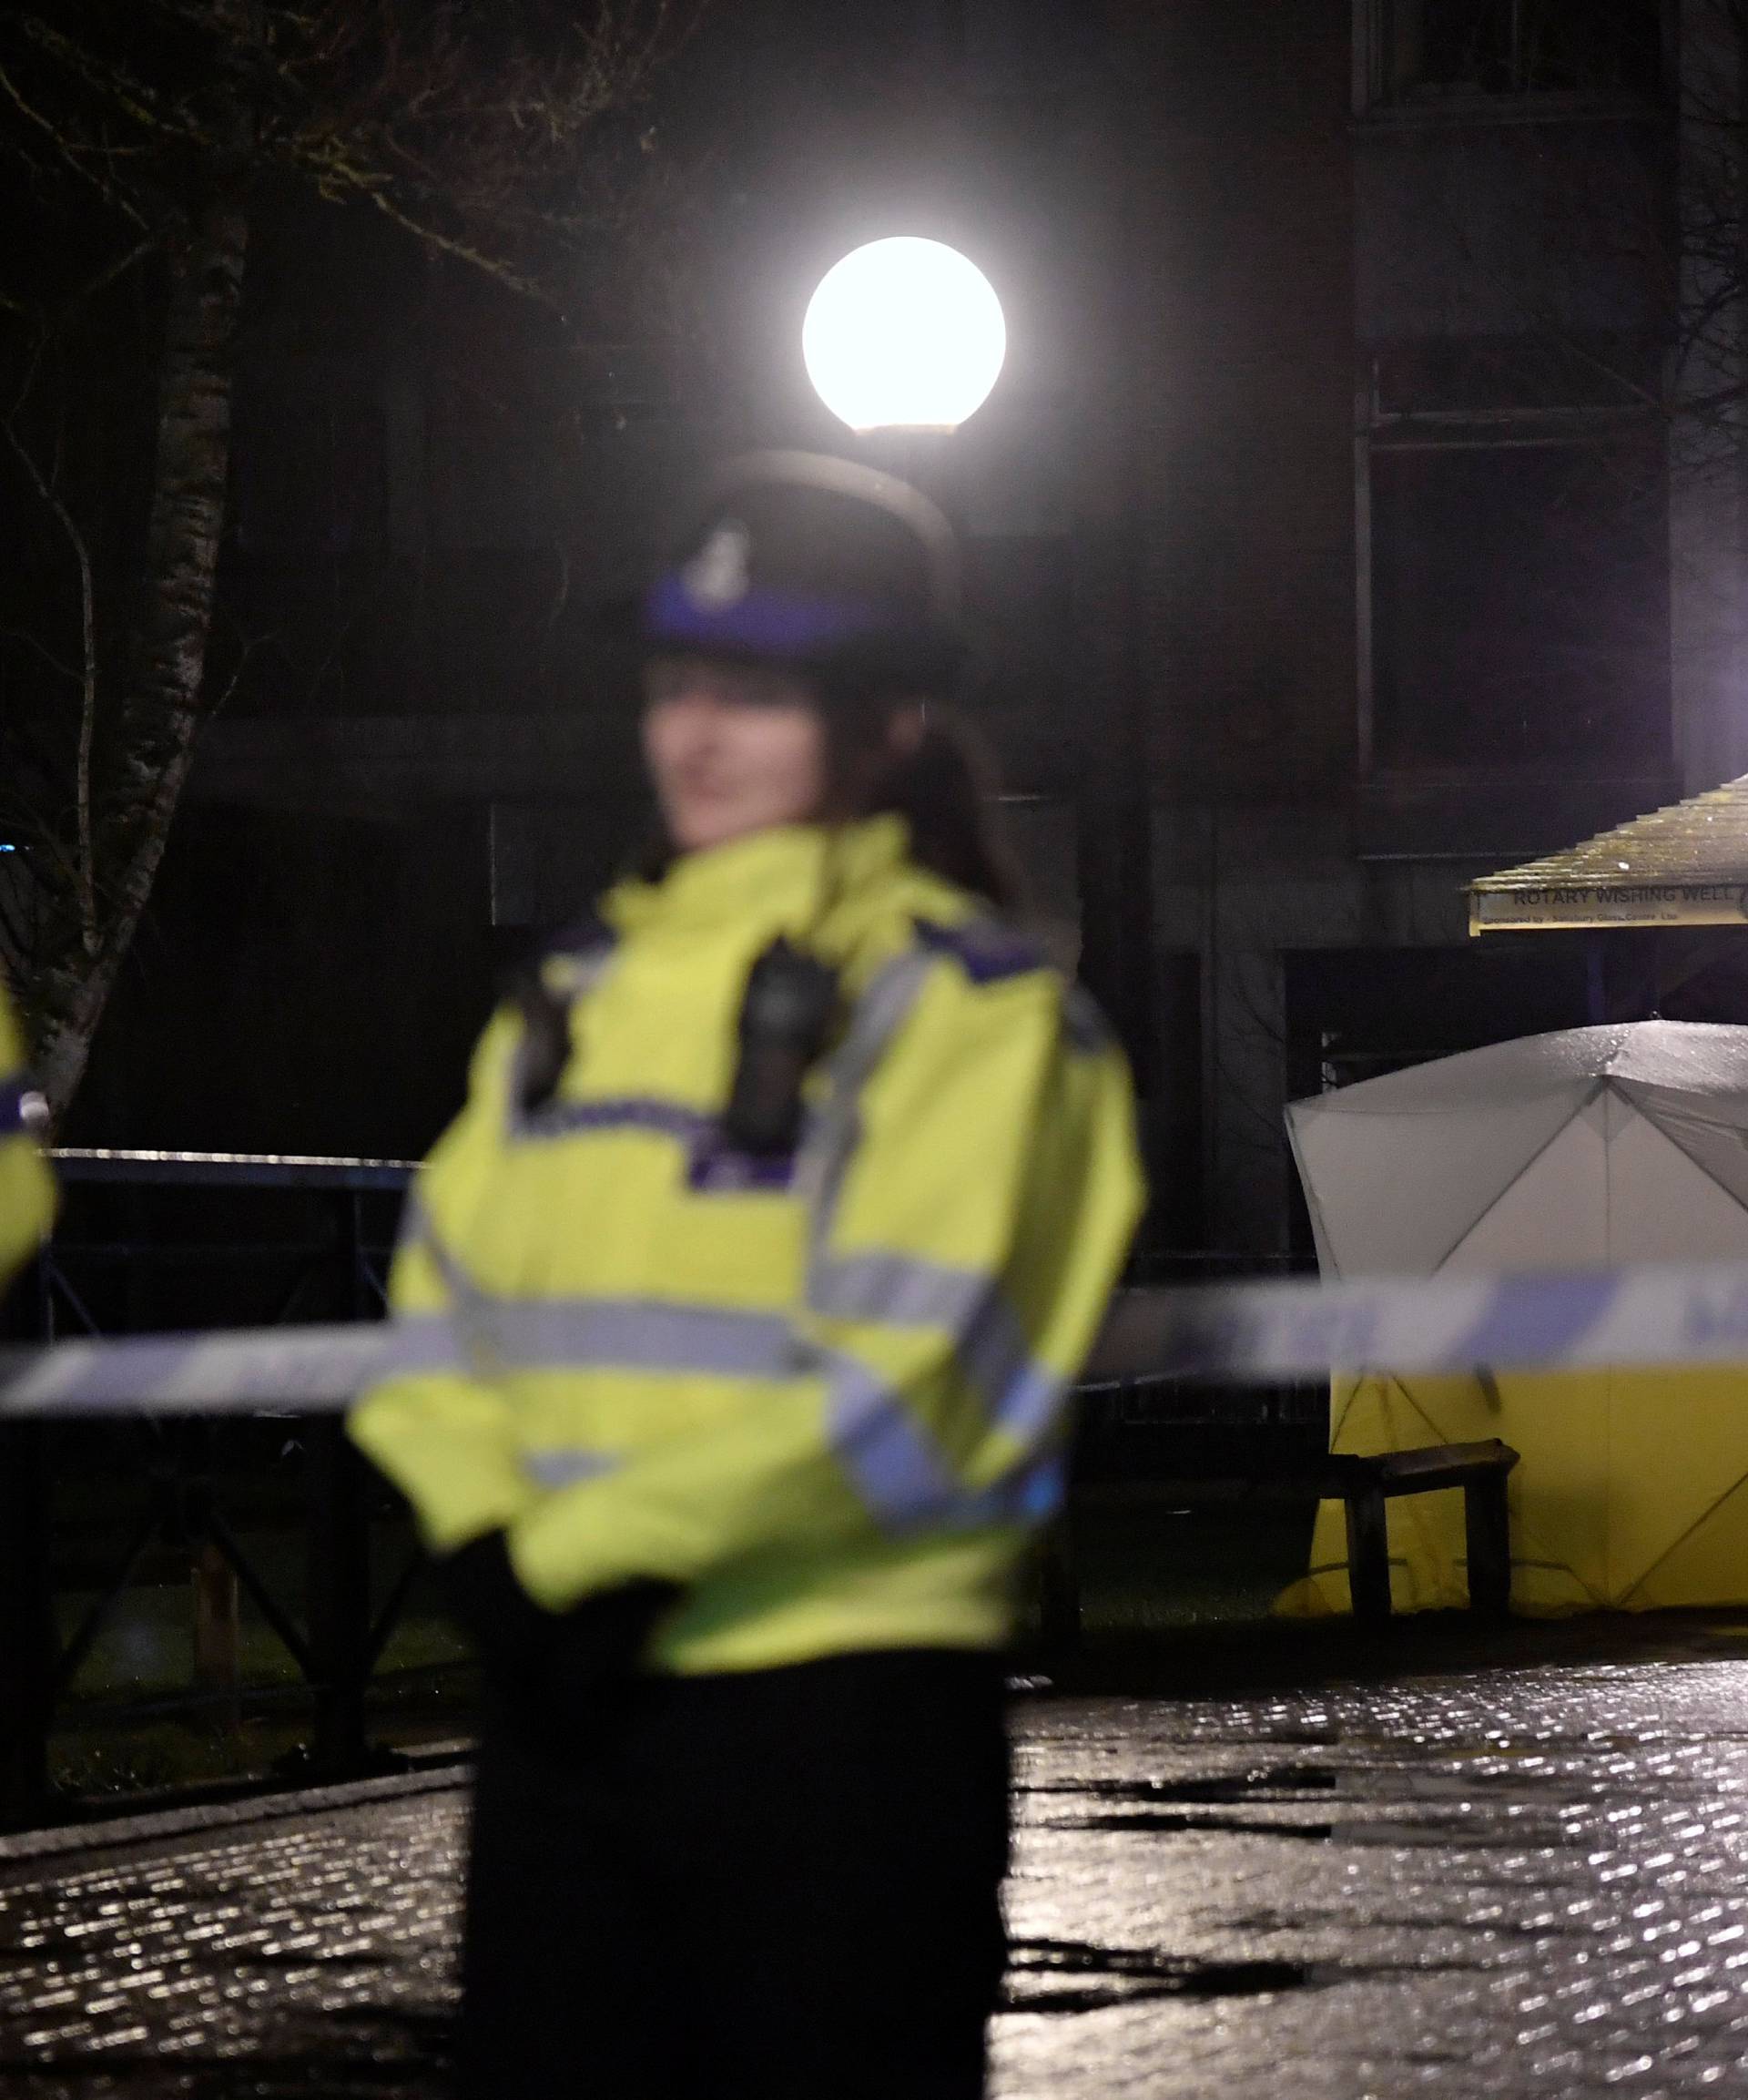 Police officers stand guard beside a cordoned-off area, after former Russian military intelligence officer Sergei Skripal, who was convicted in 2006 of spying for Britain, became critically ill after exposure to an unidentified substance, in Salisbury